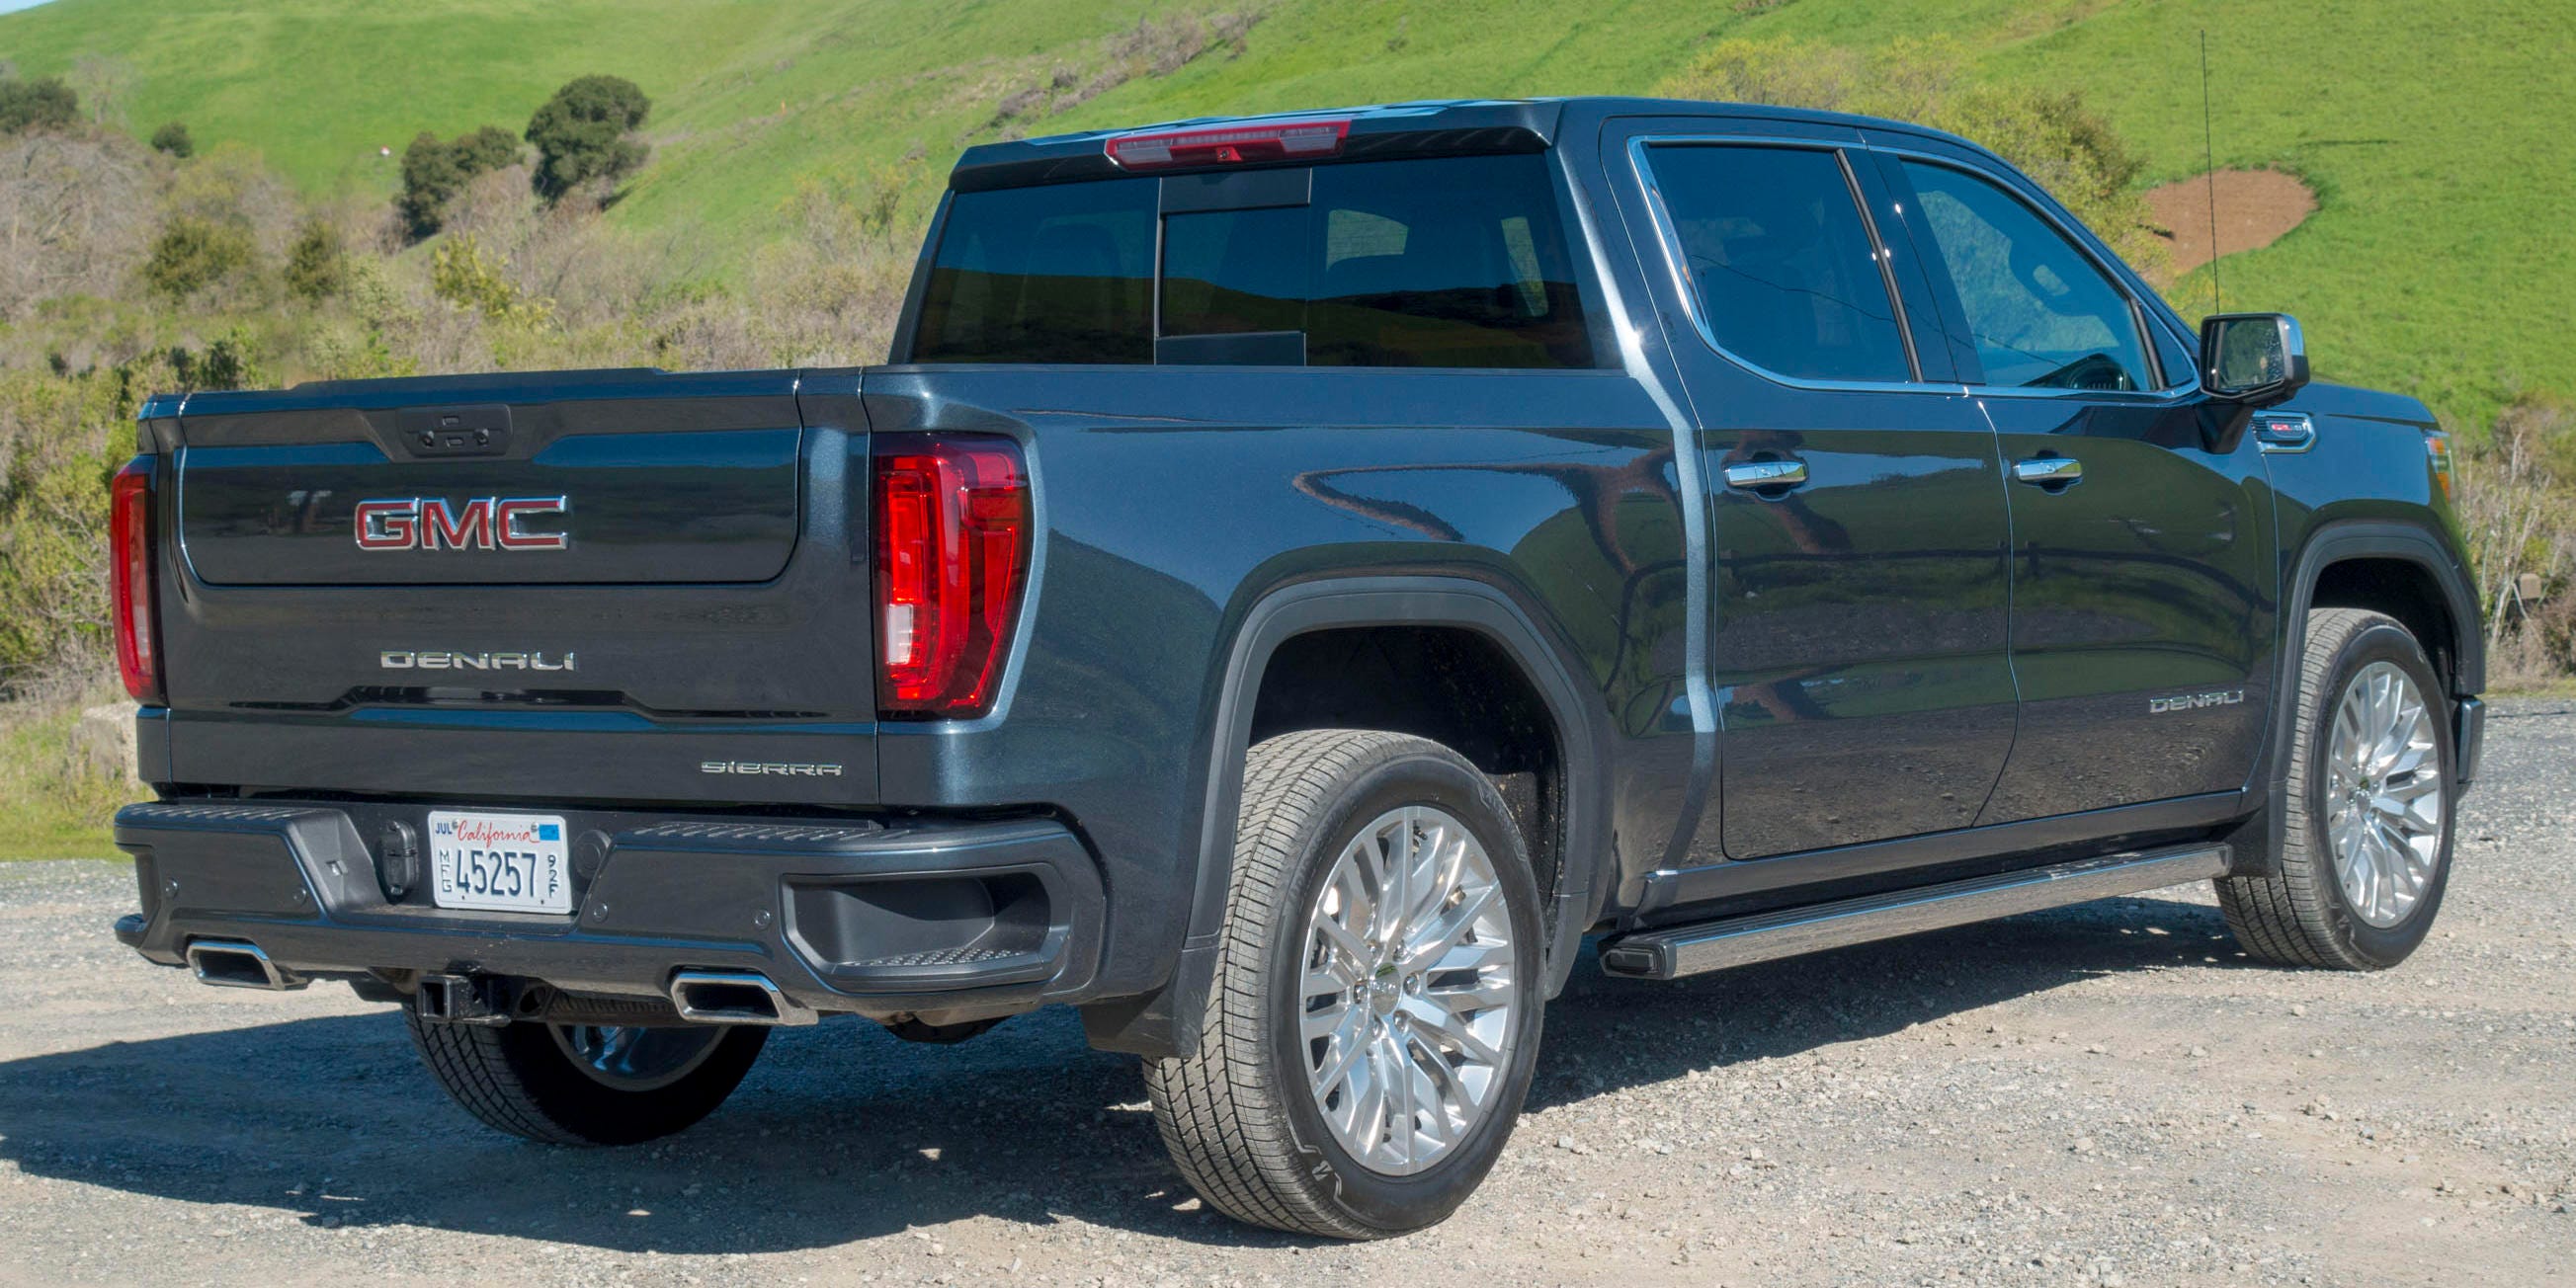 691 Collection 2019 toyota tundra vs gmc sierra for Android Wallpaper